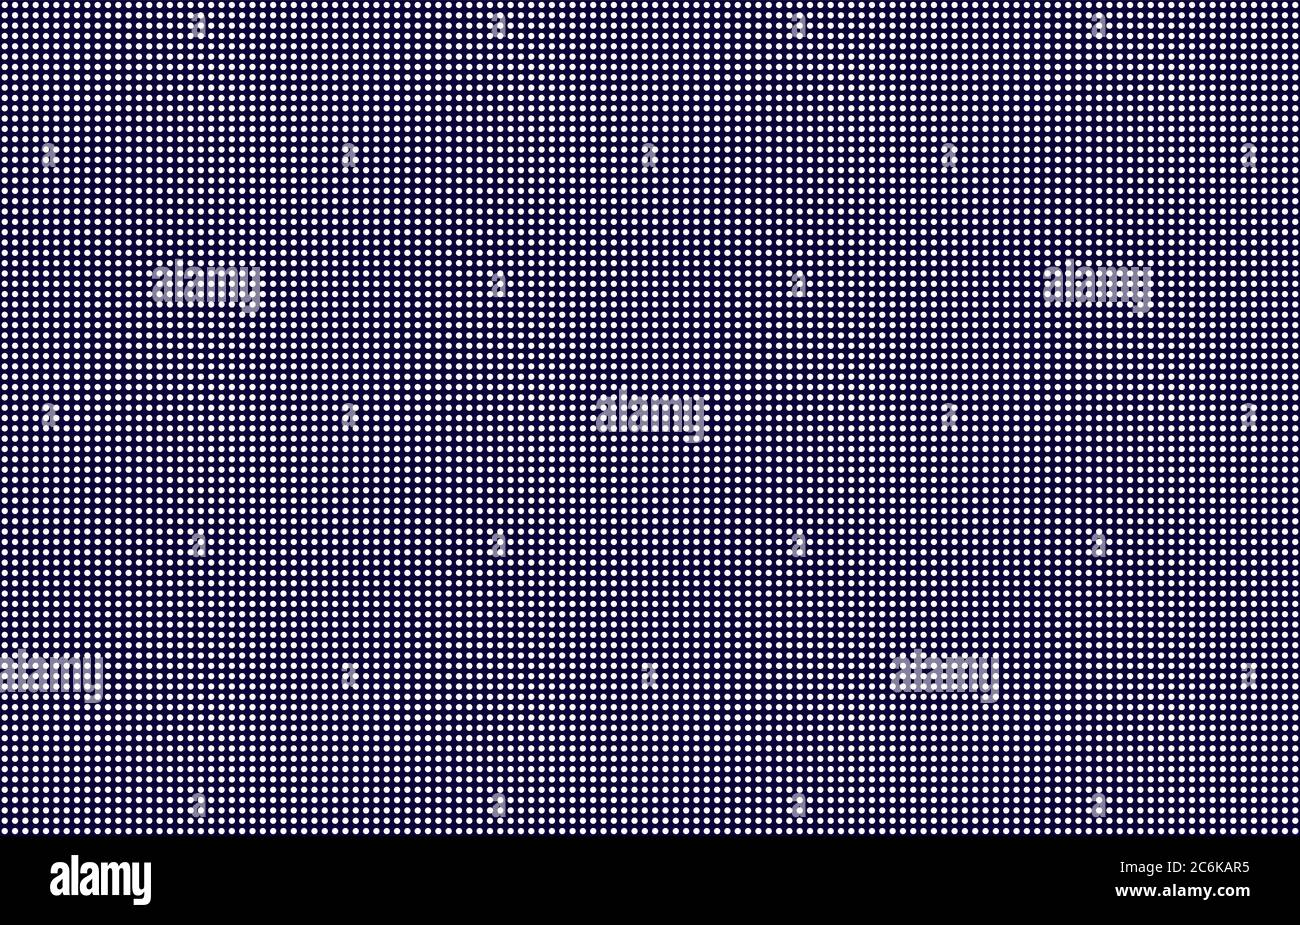 LED screen background, white monitor dots. Close-up of the macrotexture of the display. Stock Vector